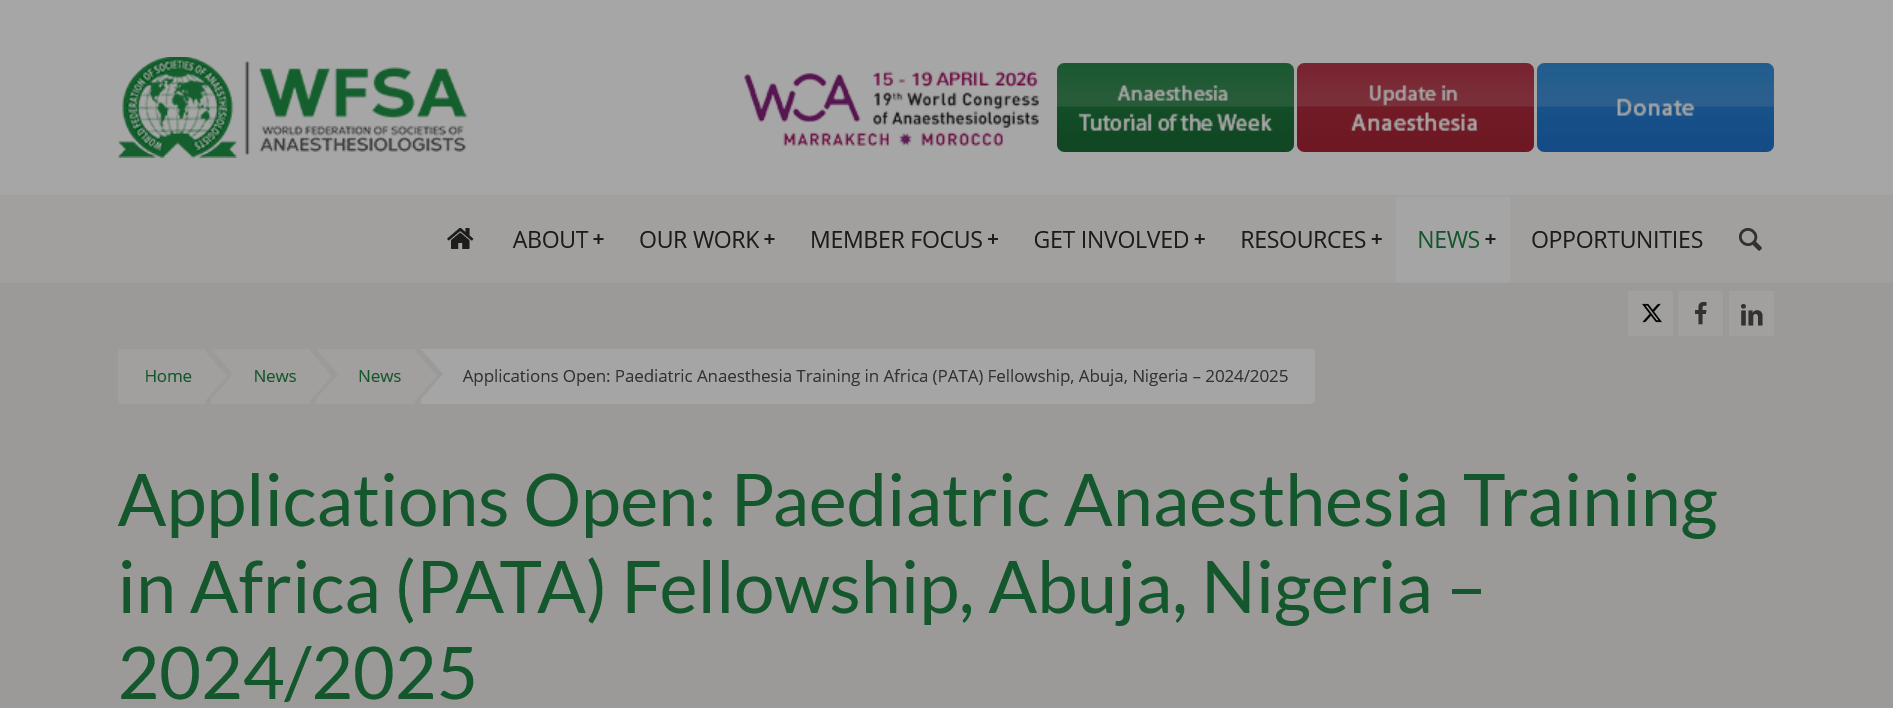 WFSA Paediatric Anaesthesia Training In Africa (PATA) Fellowship for Nigerian Students 2024